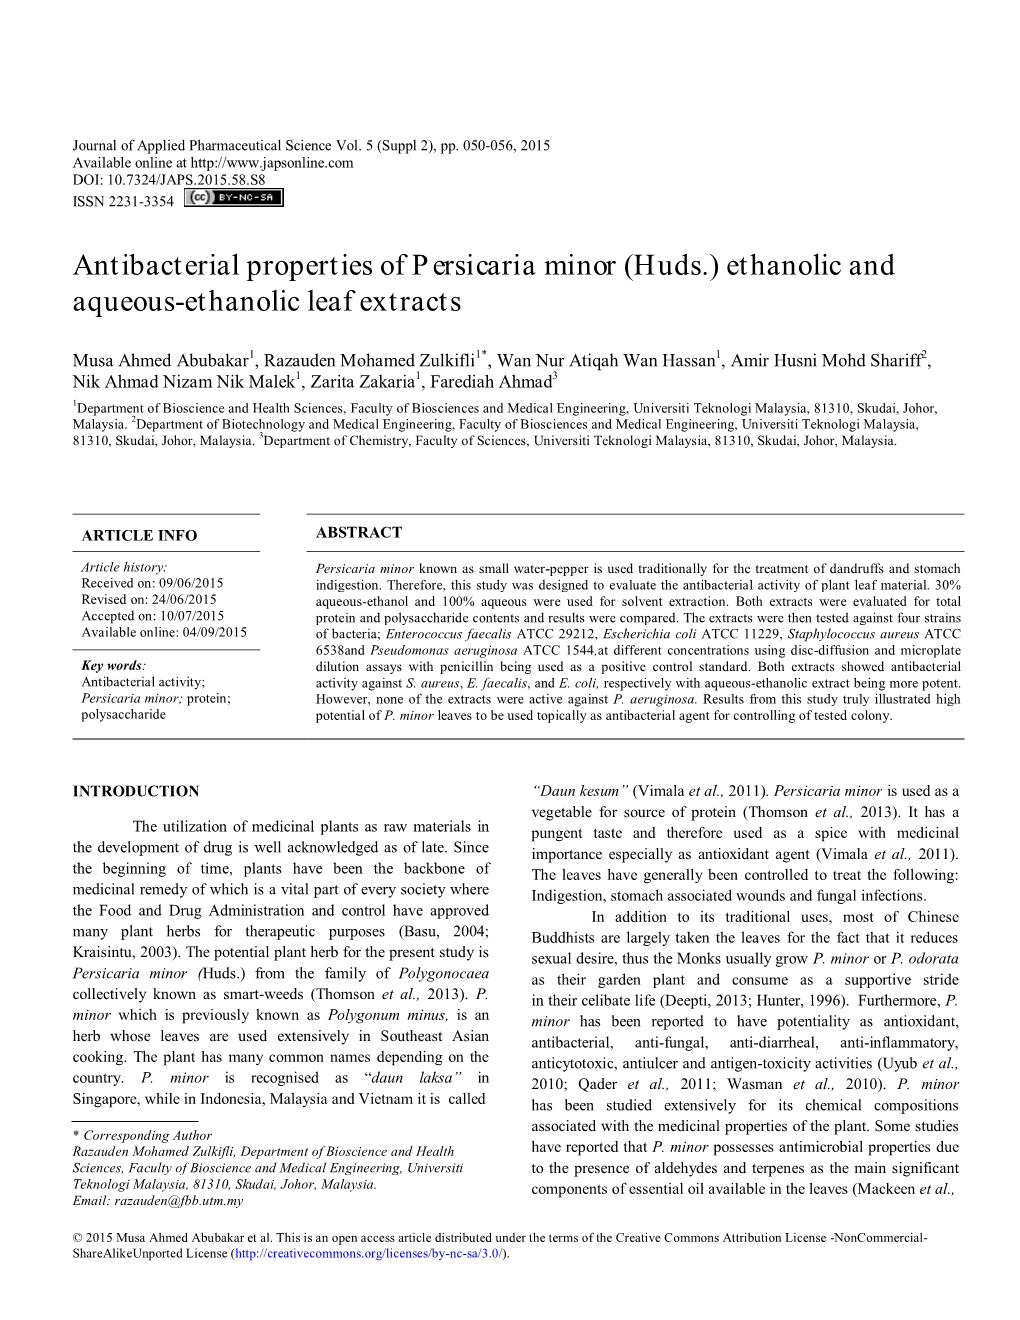 Antibacterial Properties of Persicaria Minor (Huds.) Ethanolic and Aqueous-Ethanolic Leaf Extracts